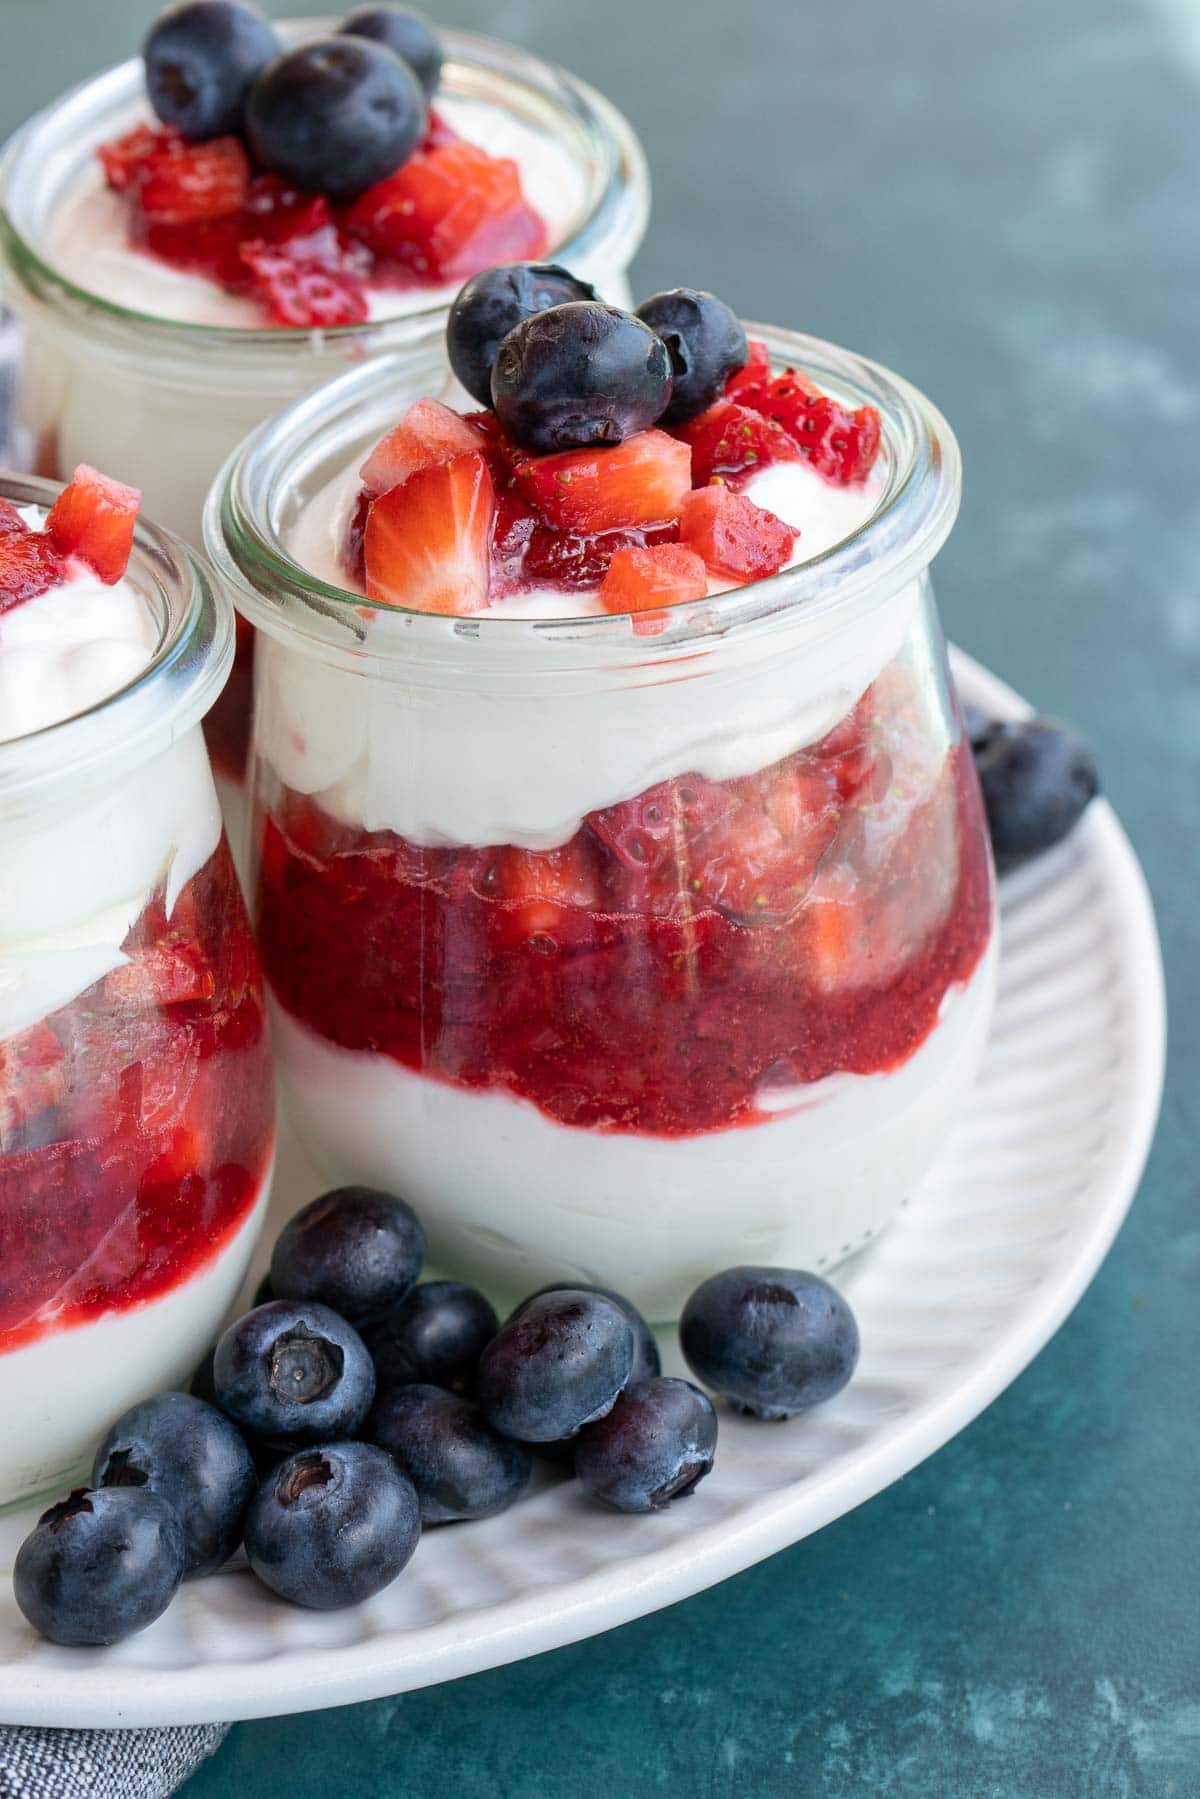 This festive No Bake Cheesecake Parfait recipe is the perfect summer treat! An indulgent cheesecake layer is paired with berries for a low-carb dessert perfect for potlucks and parties!